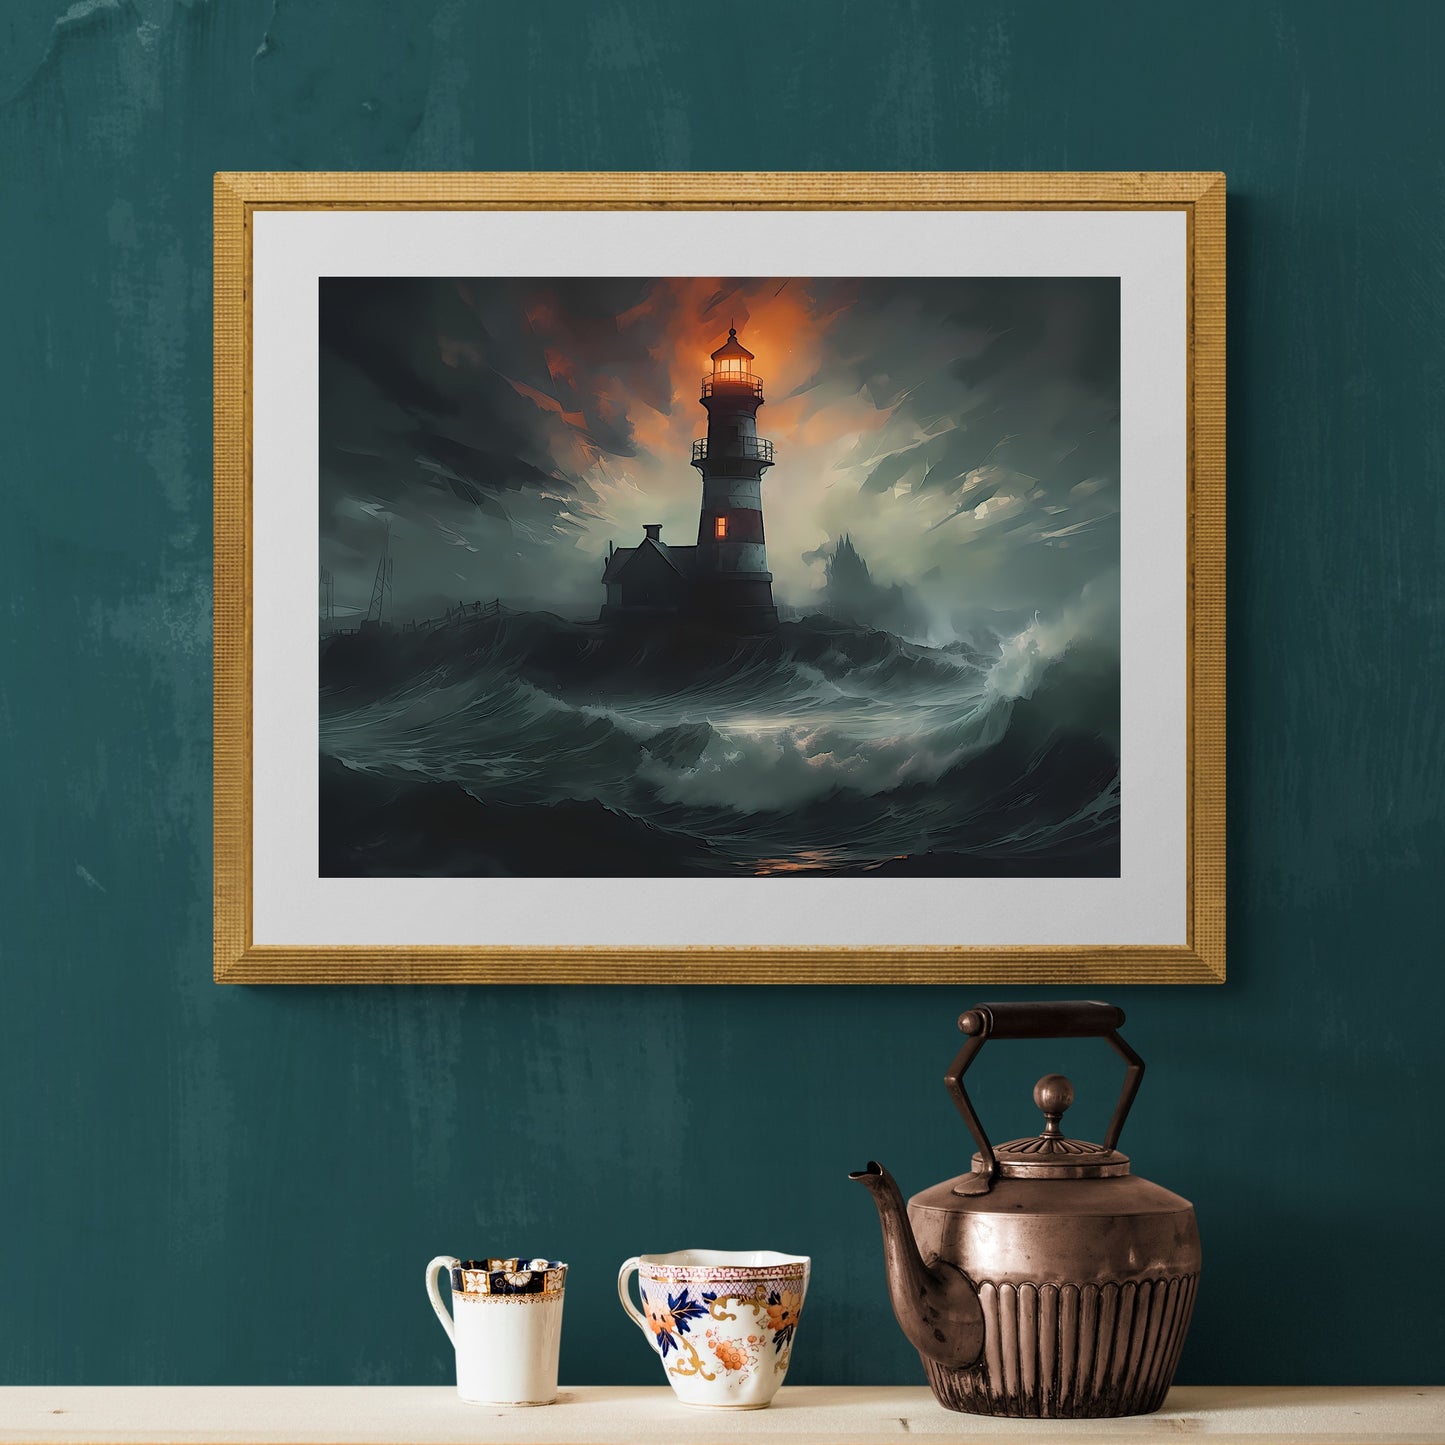 Lighthouse in Stormy Sea Gothic Wall Art Paper Poster Prints Vintage Seascape Painting Dark Academia Print Dark Aesthetic Room Decor Nautical Artwork